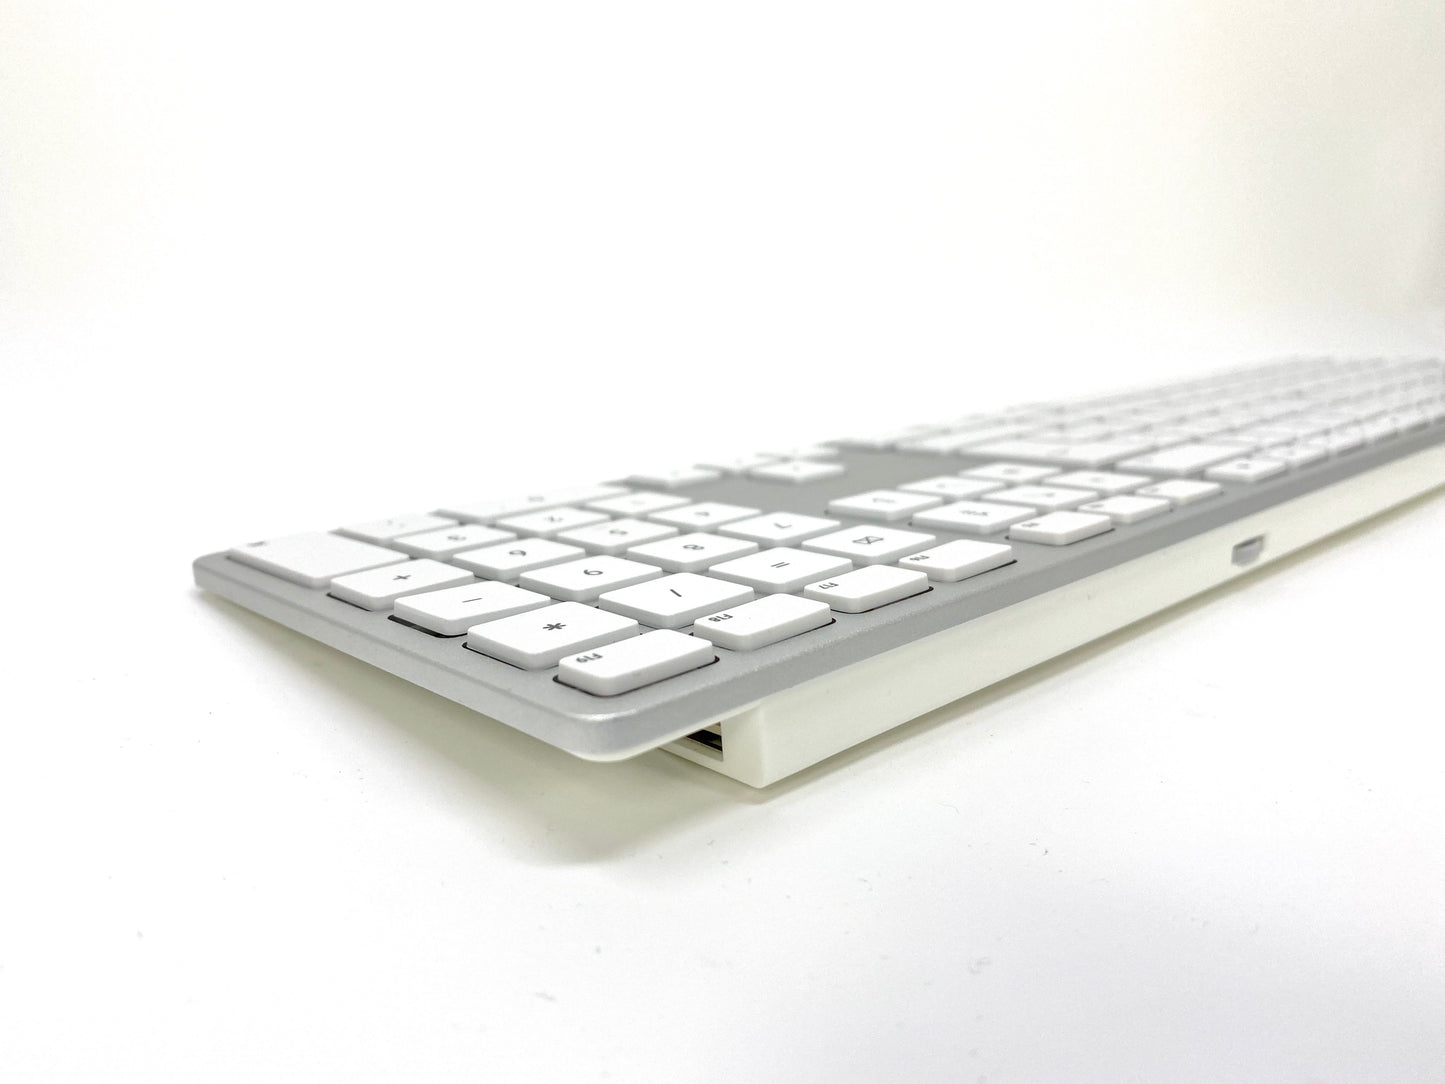 Wired Aluminum Keyboard for Mac - Silver - French Canadian Version